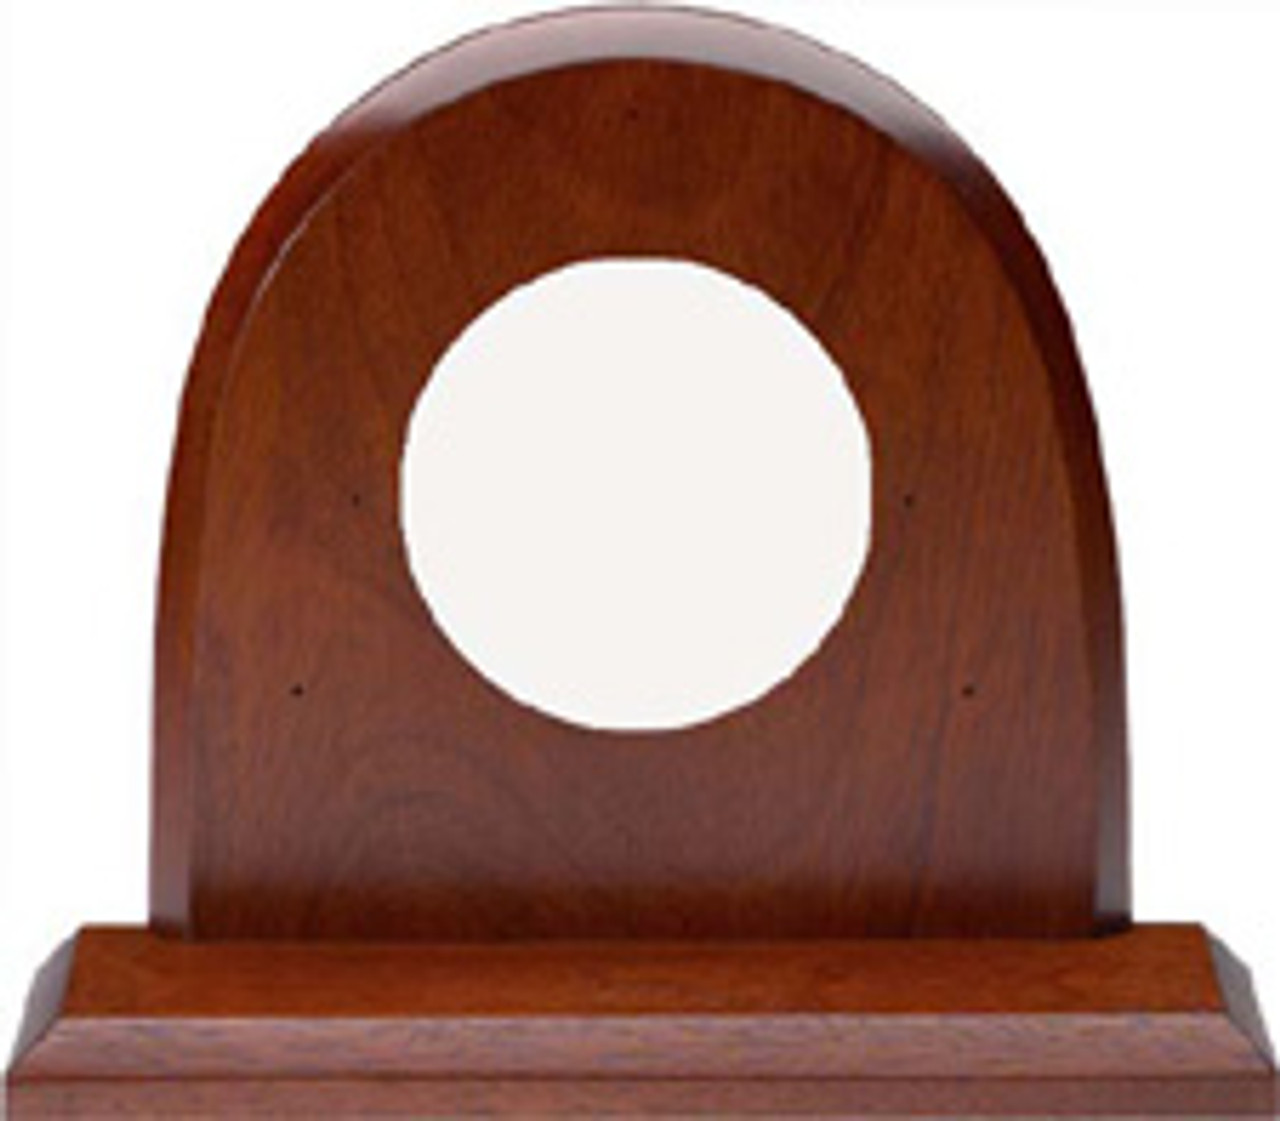 Mahogany Mantle Mount for Cronus Time and Tide Clock Instrument - PVD Coated Brass Case